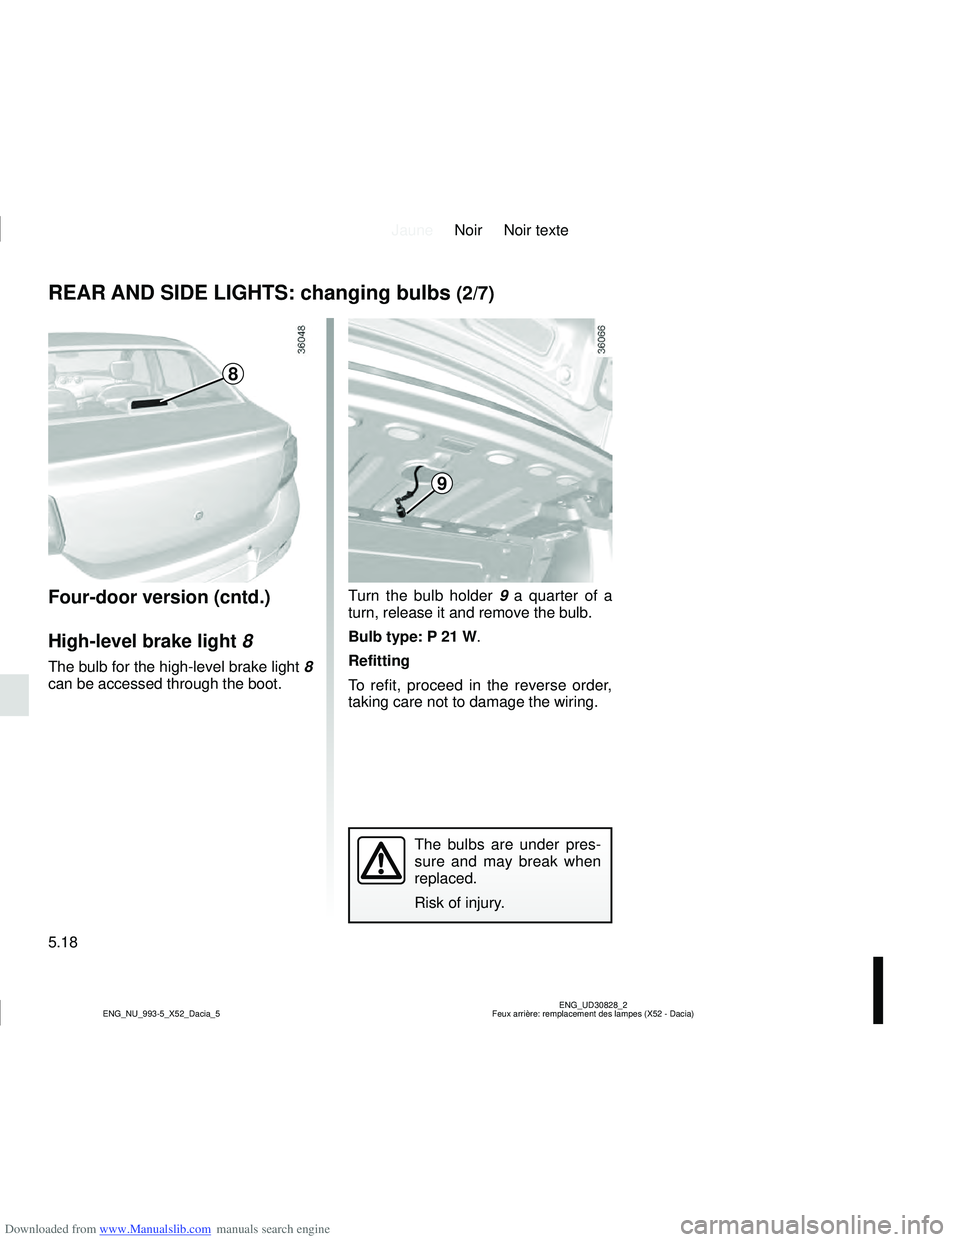 DACIA SANDERO 2021  Owners Manual Downloaded from www.Manualslib.com manuals search engine JauneNoir Noir texte
5.18
ENG_UD30828_2
Feux arrière: remplacement des lampes (X52 - Dacia)
ENG_NU_993-5_X52_Dacia_5
REAR AND SIDE LIGHTS: cha